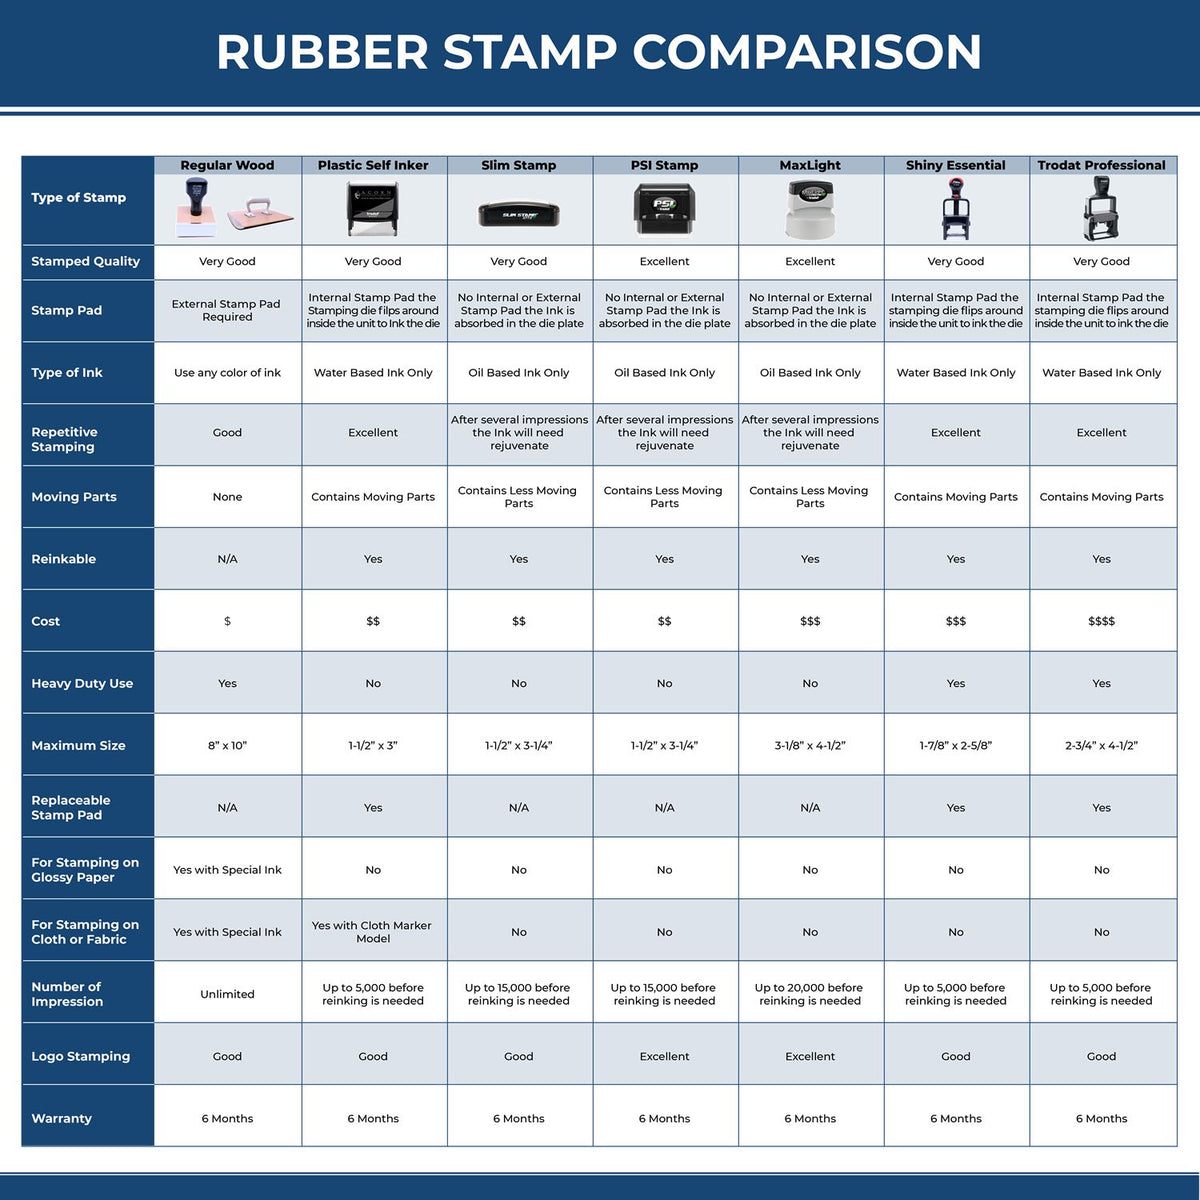 Large You Insurance has Paid their portion Rubber Stamp 5566R Rubber Stamp Comparison